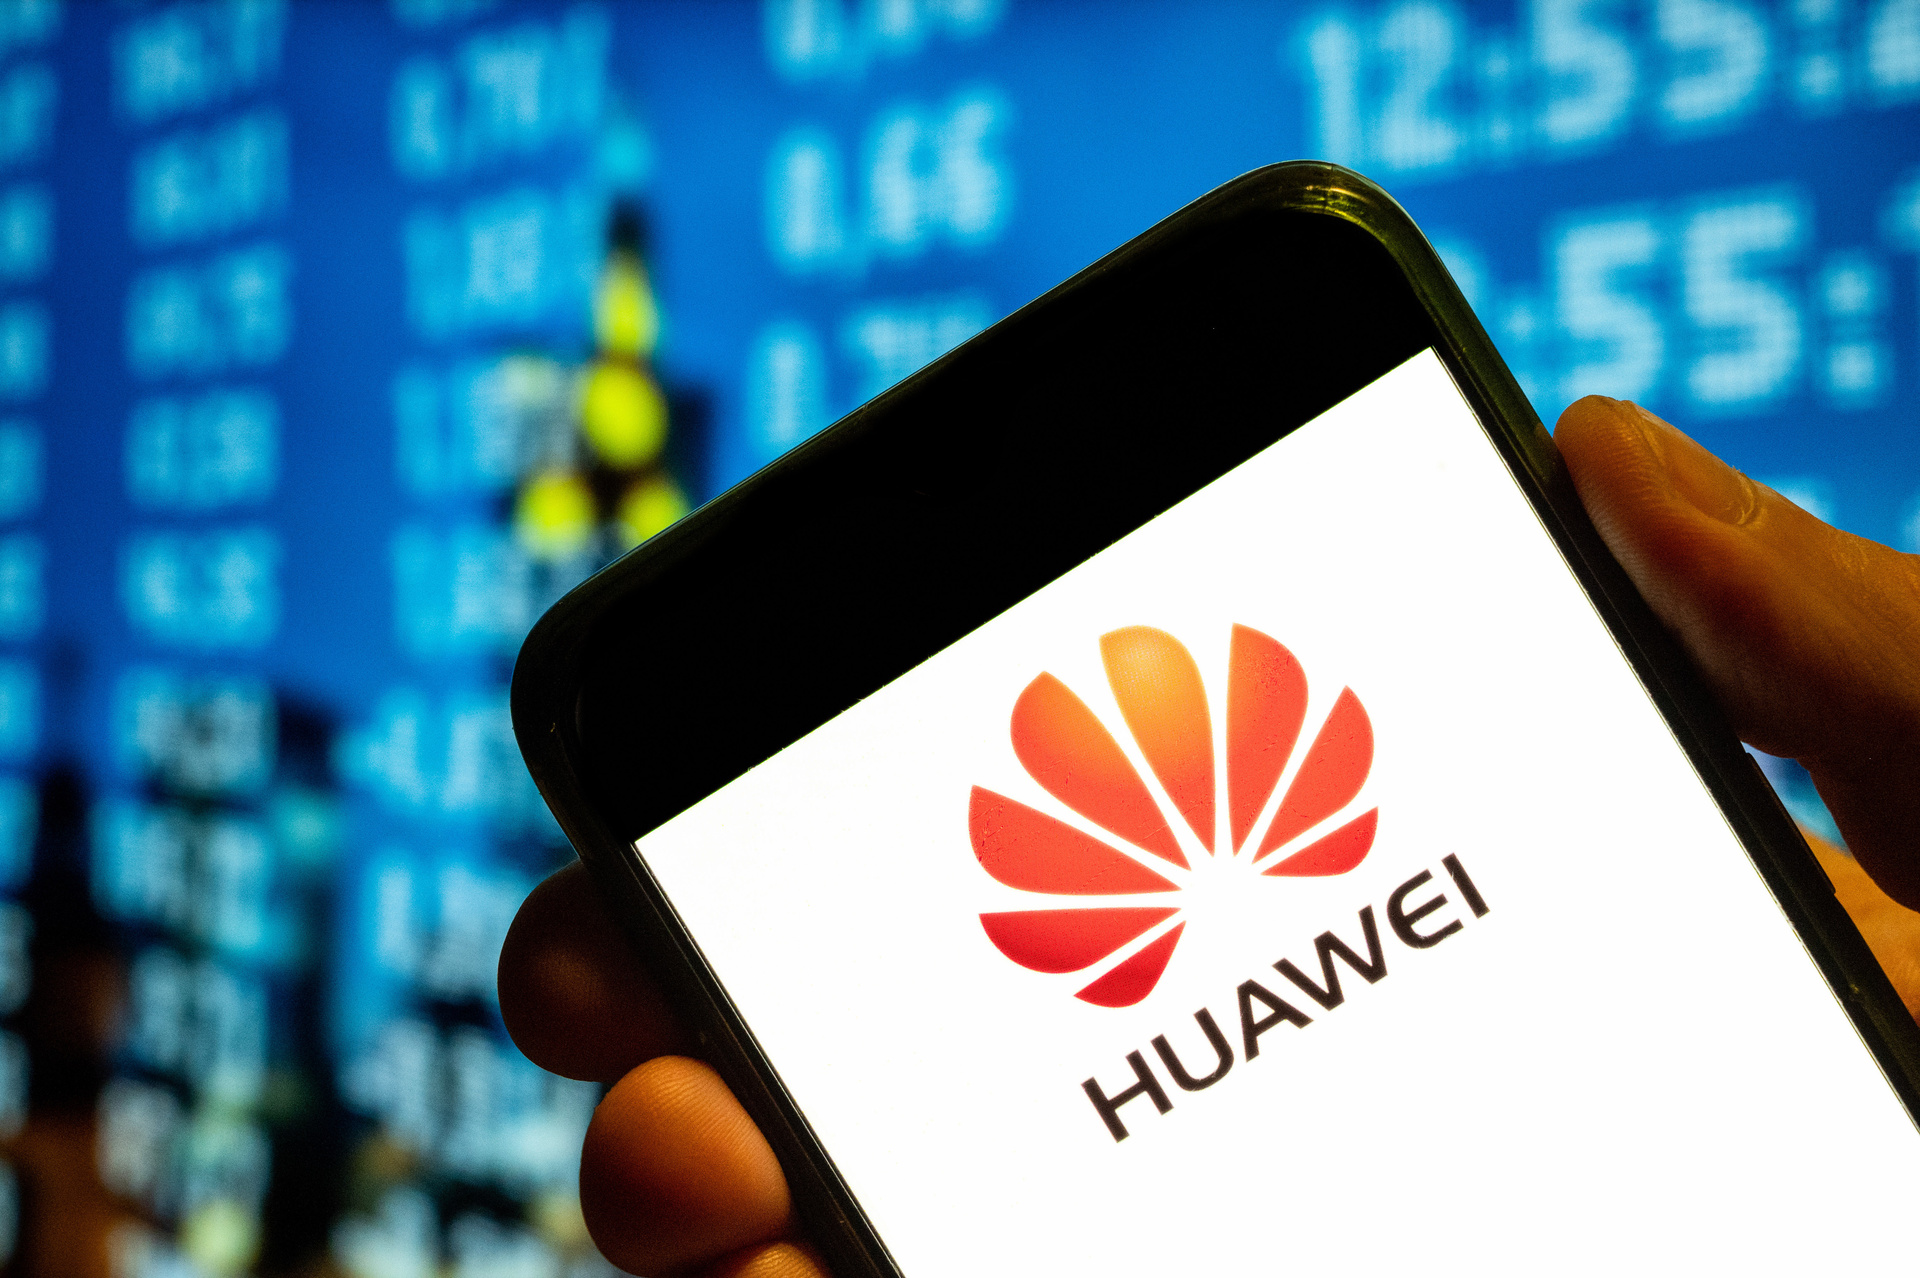 Alarm in China as Huawei founder warns of 'painful' next decade - NZ Herald